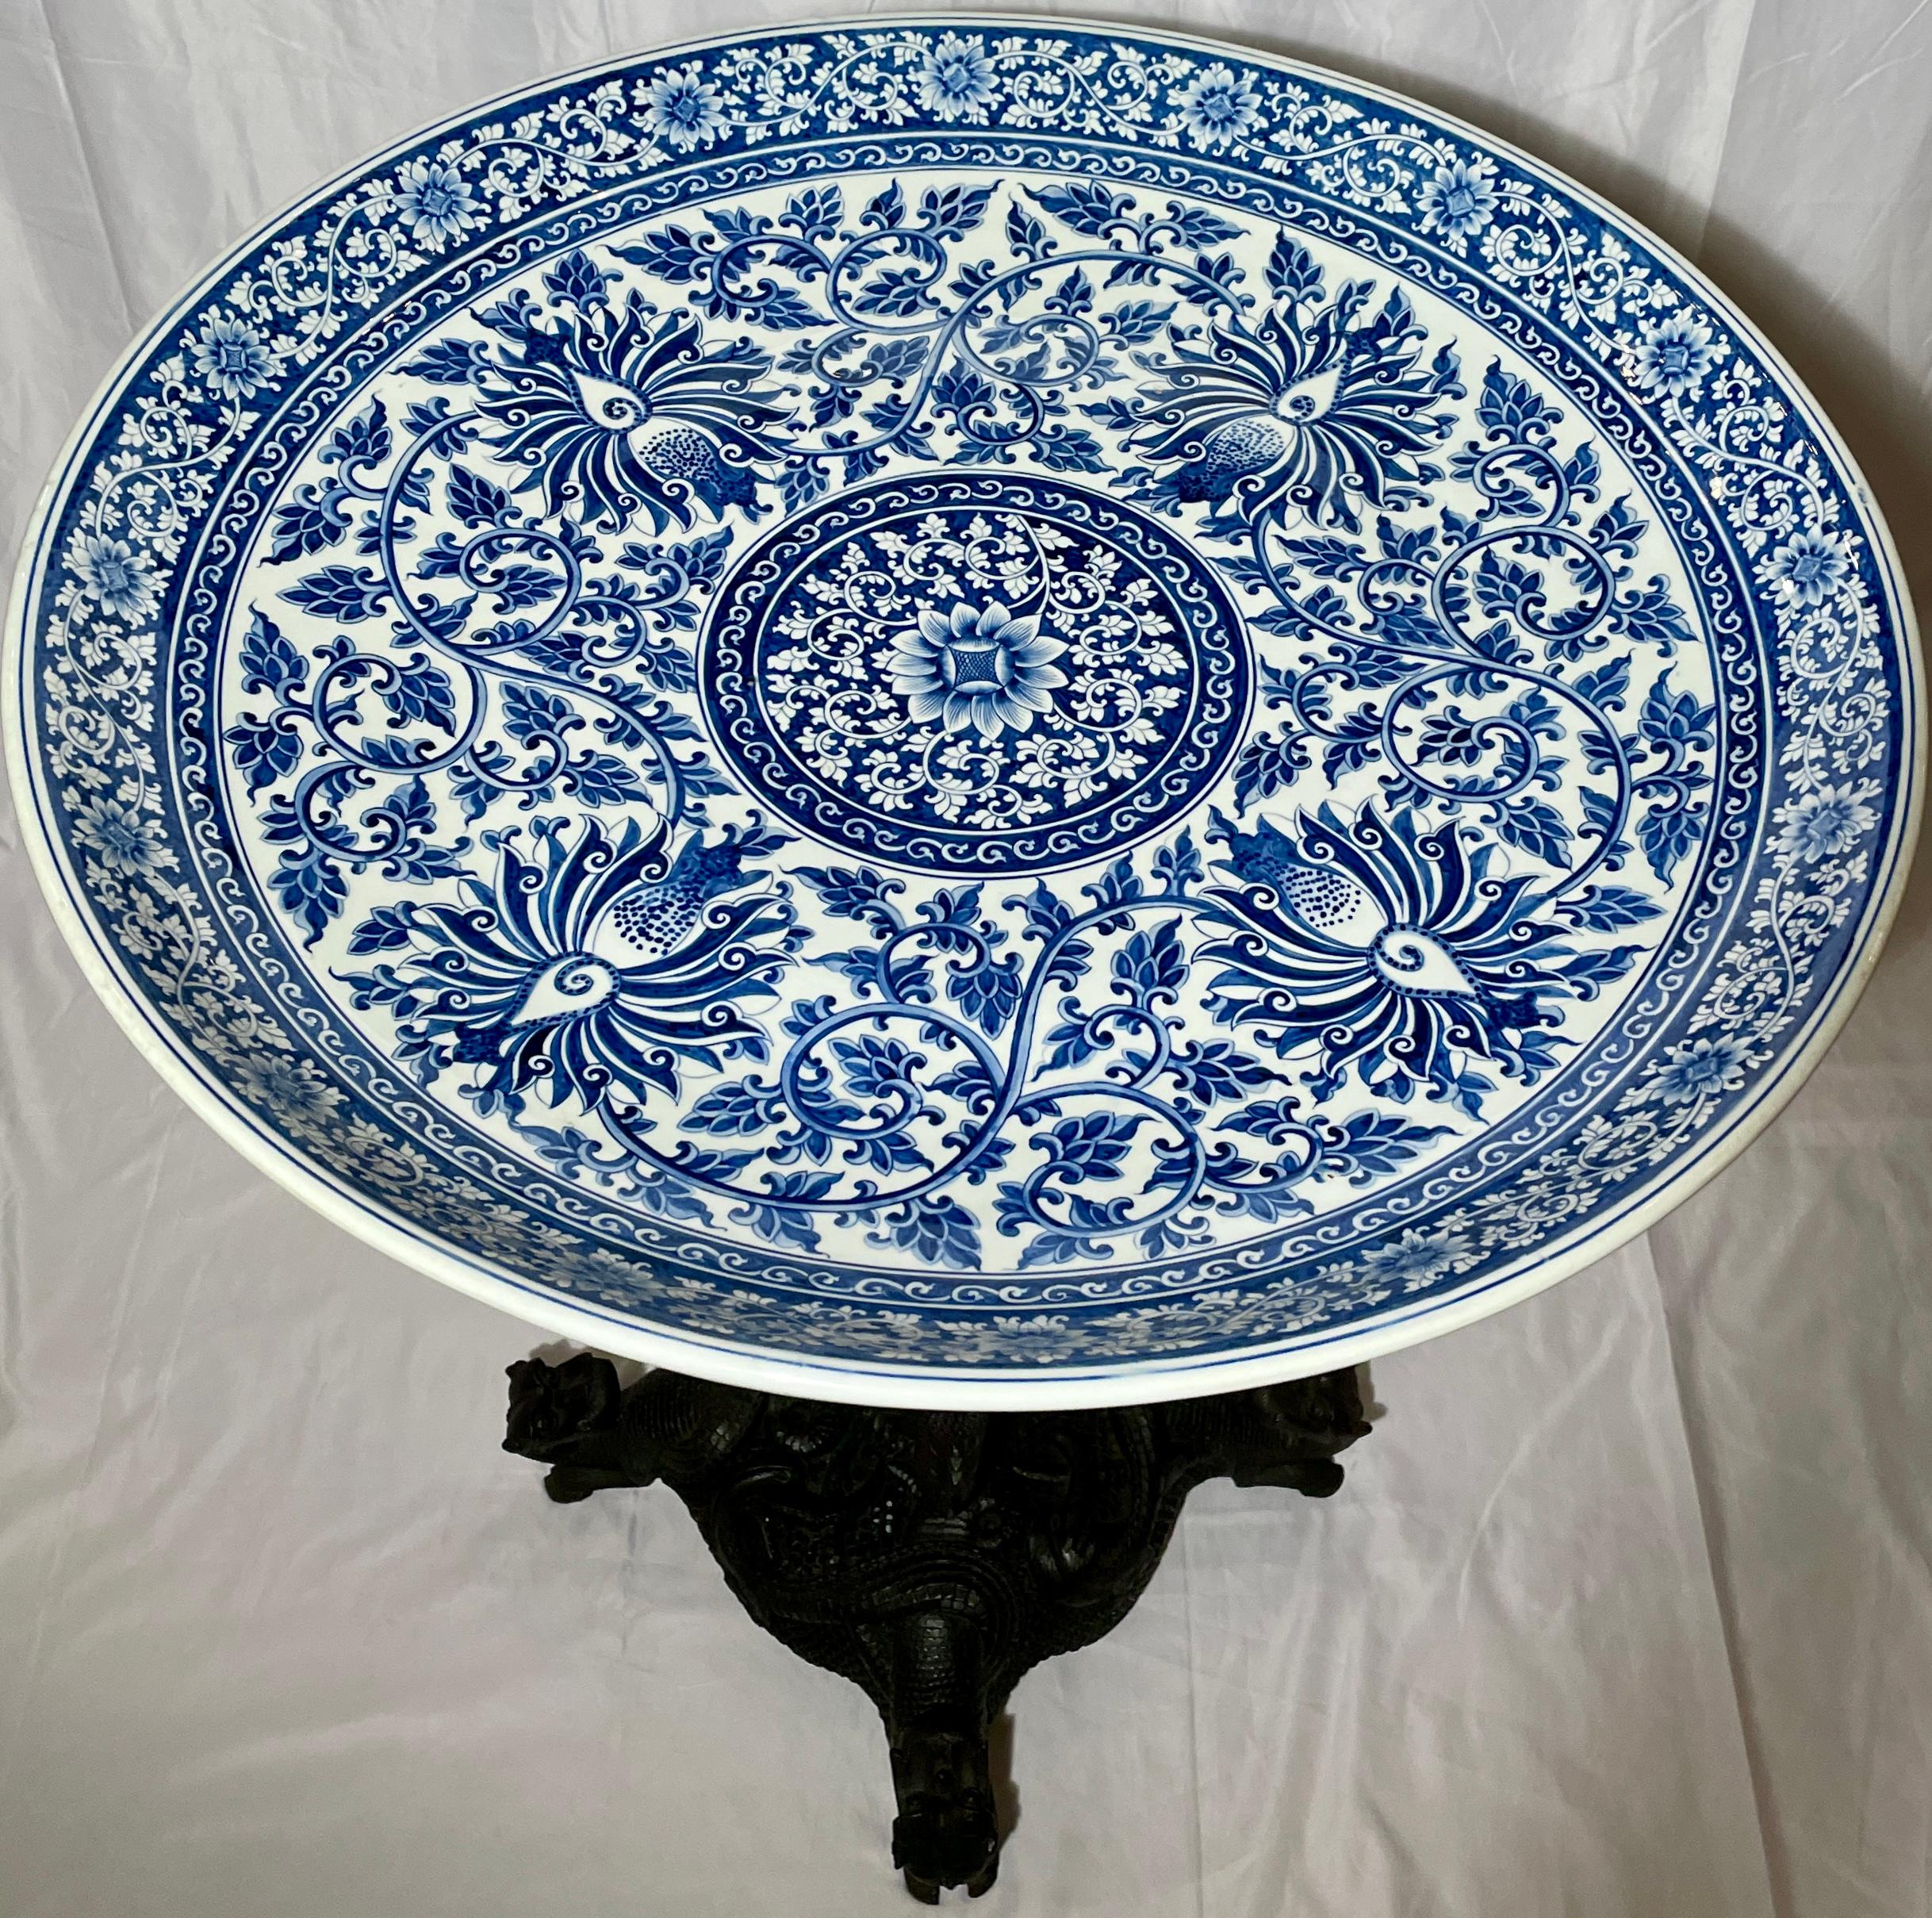 20th Century Antique Asian Blue & White Porcelain and Carved Hardwood Table, circa 1900s For Sale